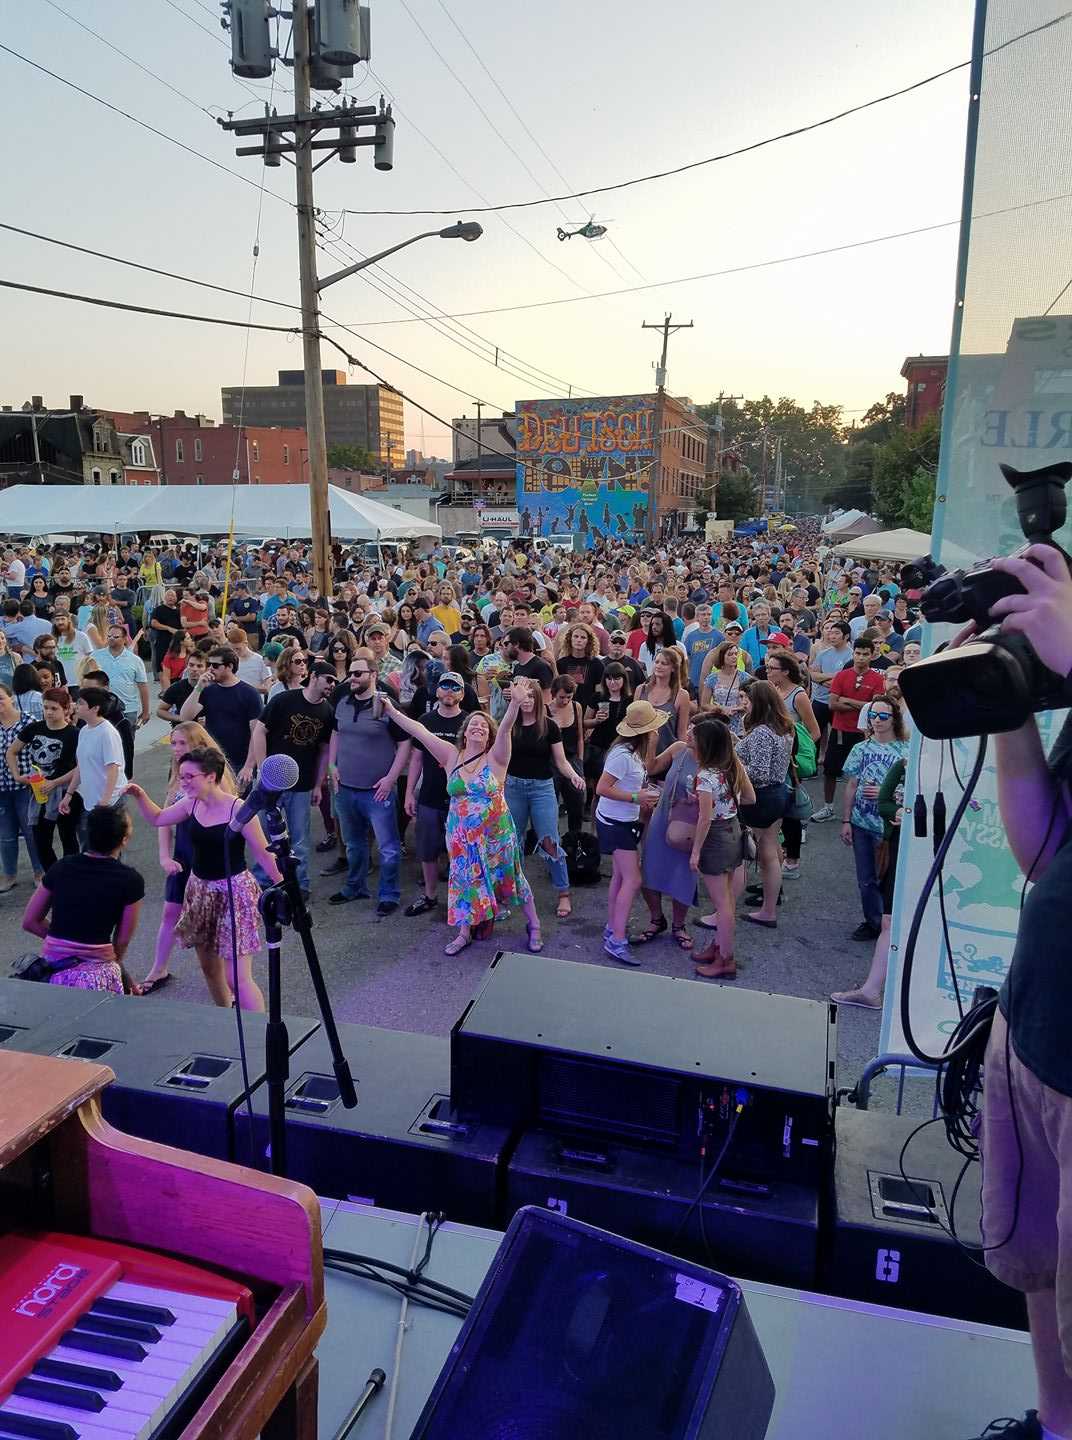 View of the crowd from the stage at the first annual Deutschtown Music Festival. “Deutschtown Music Festival," used with permission by Cody Walters.